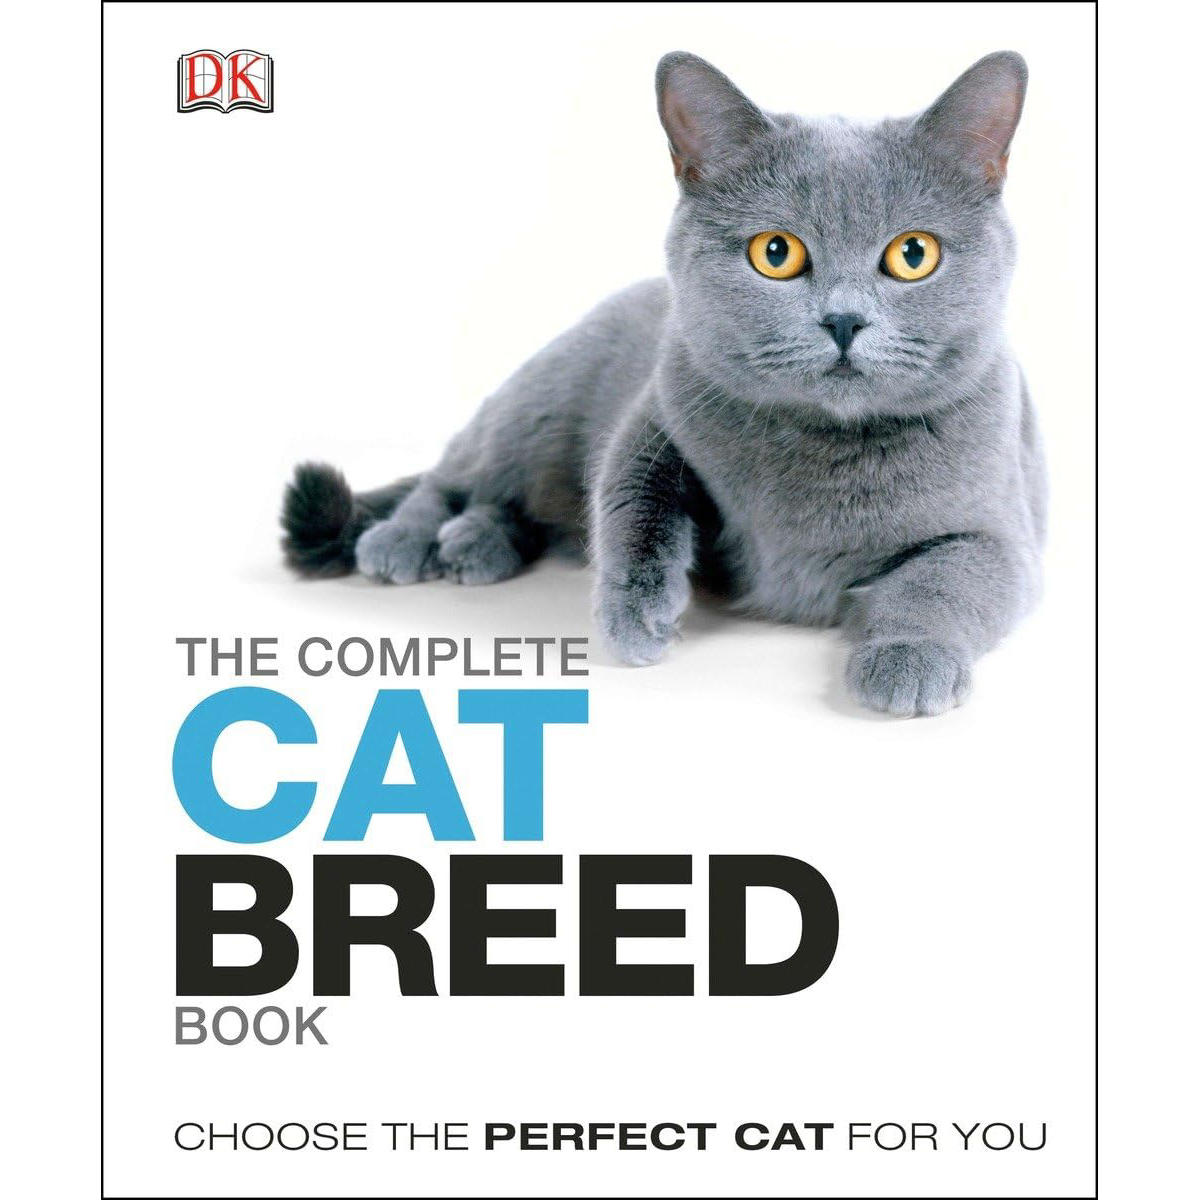 The Complete Cat Breed Book- Choose the Perfect Cat for You (Dk the Complete Cat Breed Book)